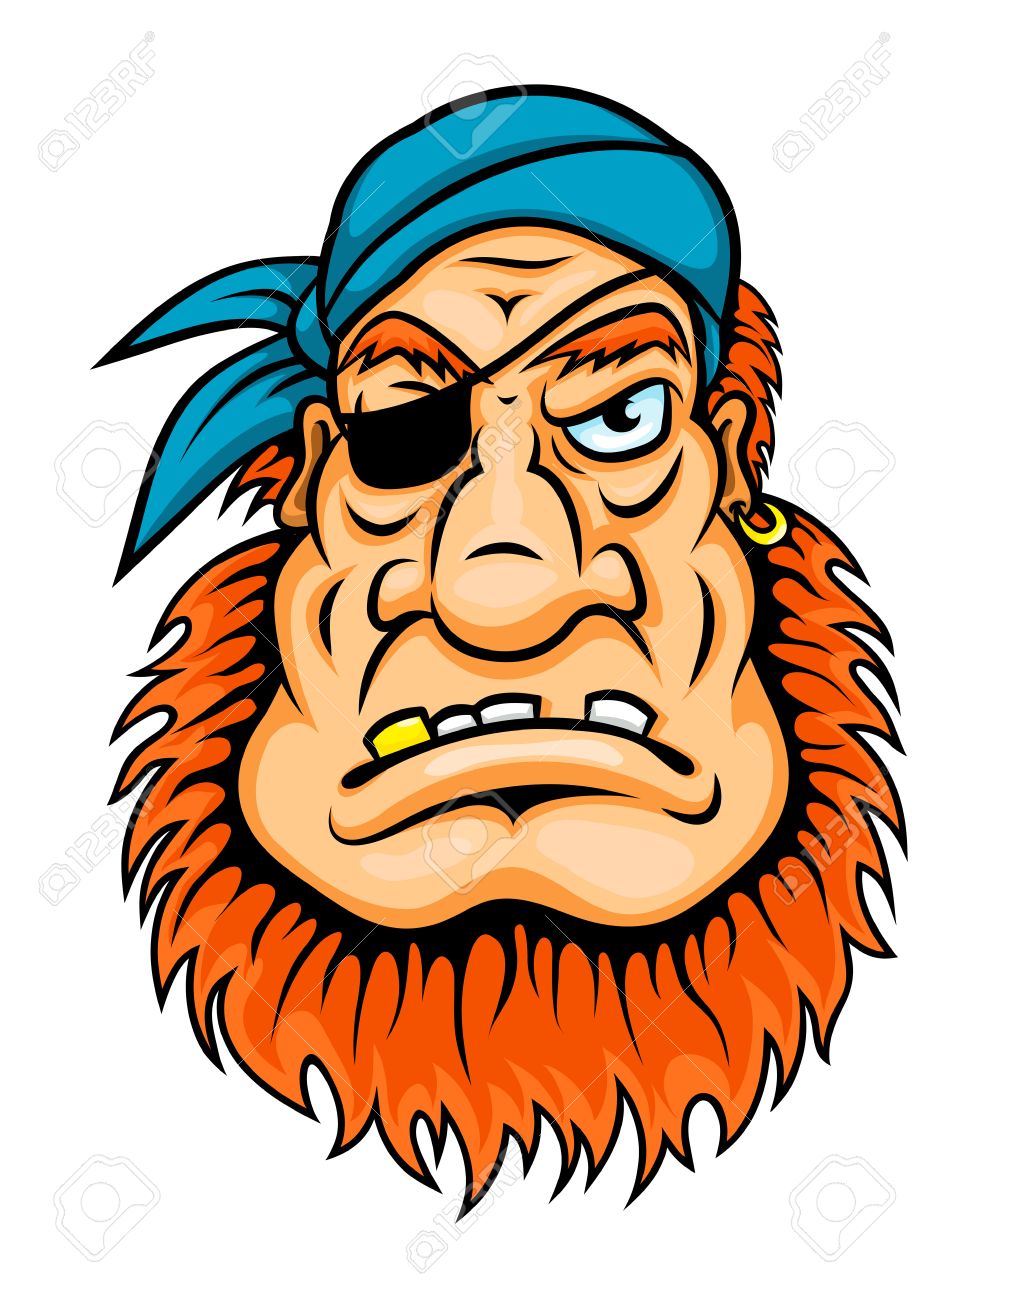 22365199-pirate-with-red-beard-in-cartoon-style-for-mascot-design.jpg